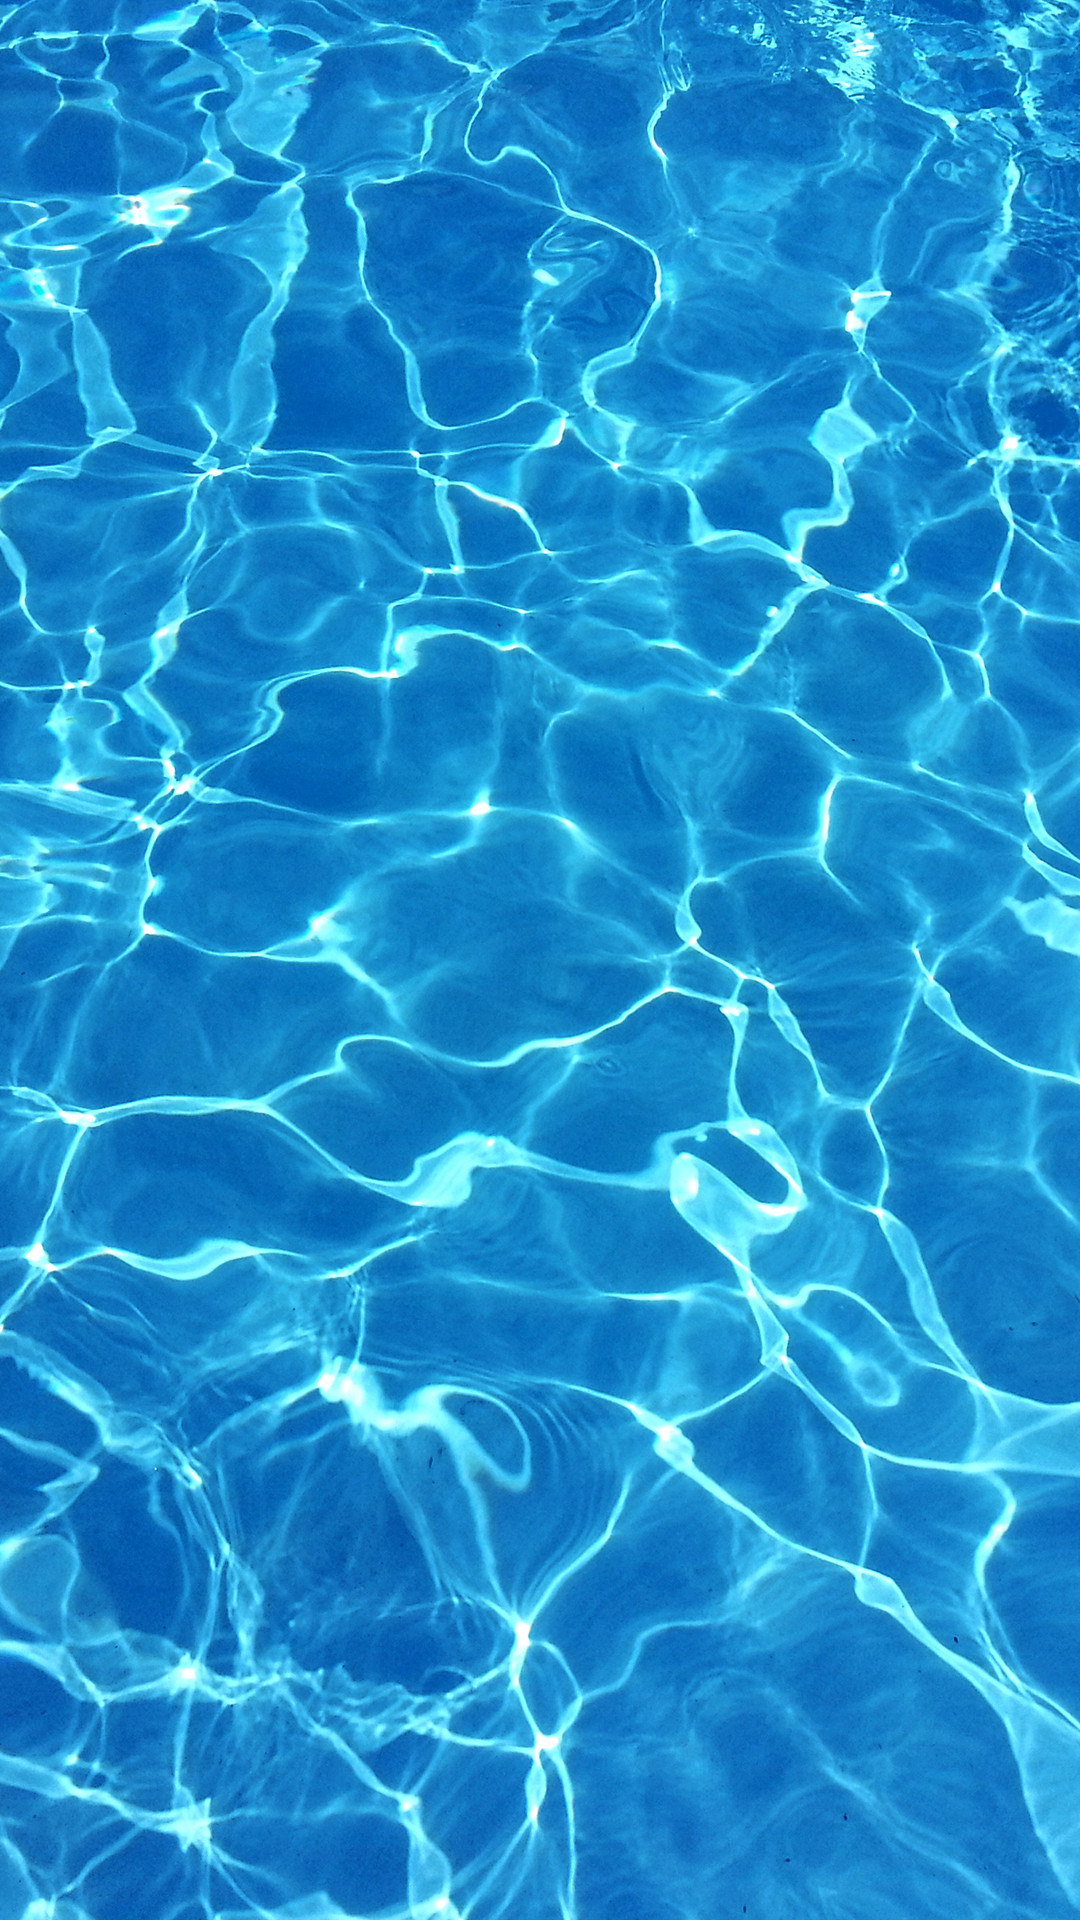 1080x1920 Pool Water Cool Iphone Background